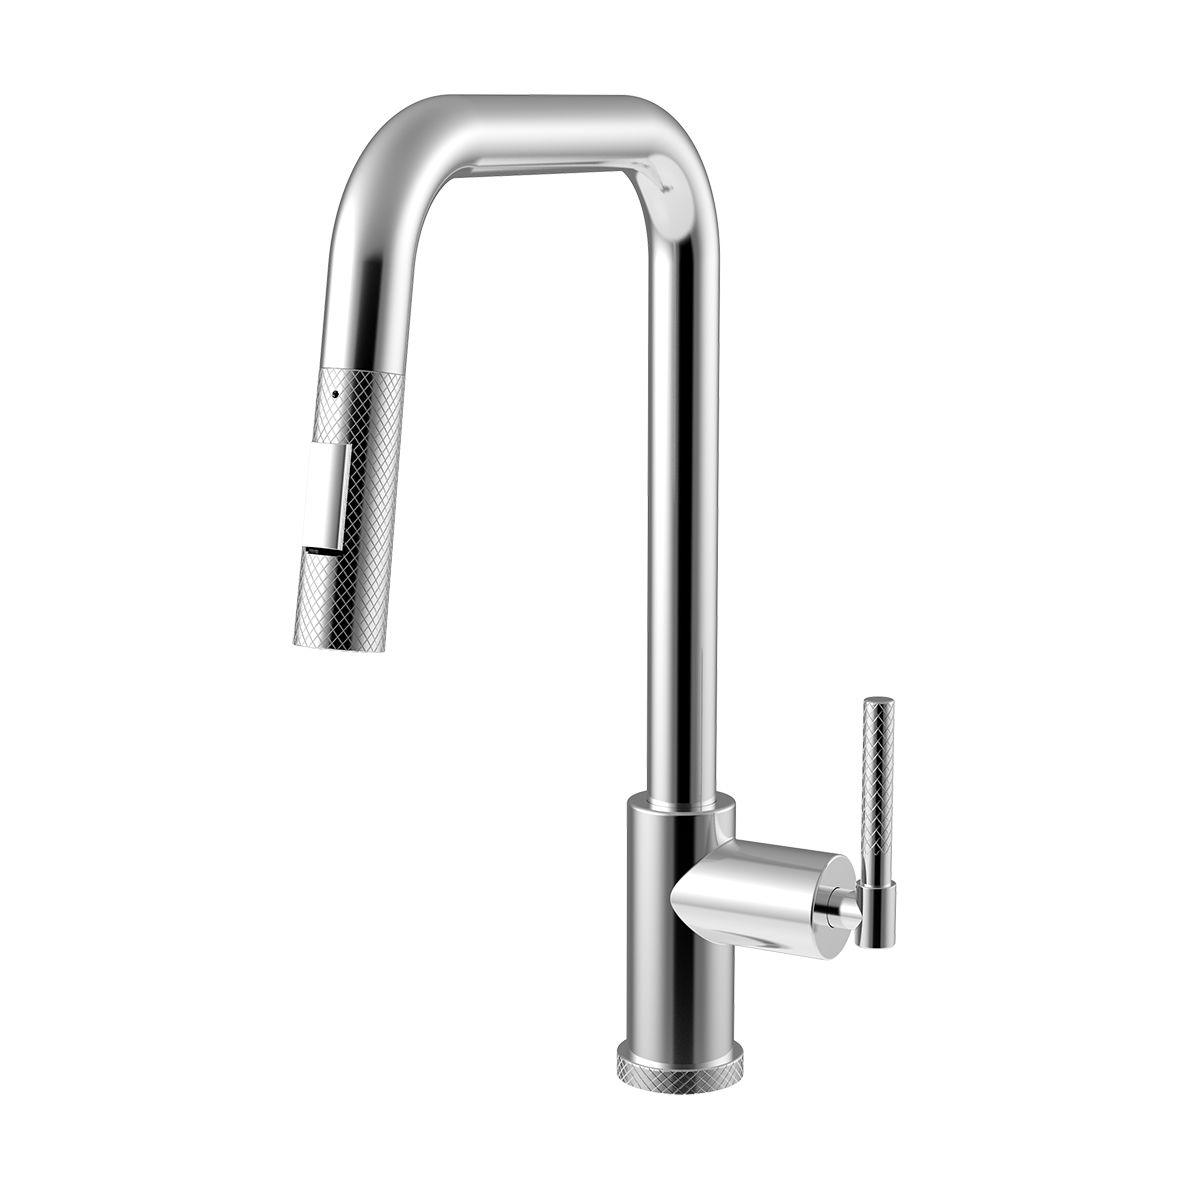 Aquacubic cUPC certified Hot sale Single handle low lead brass pull down Kitchen Sink Faucets